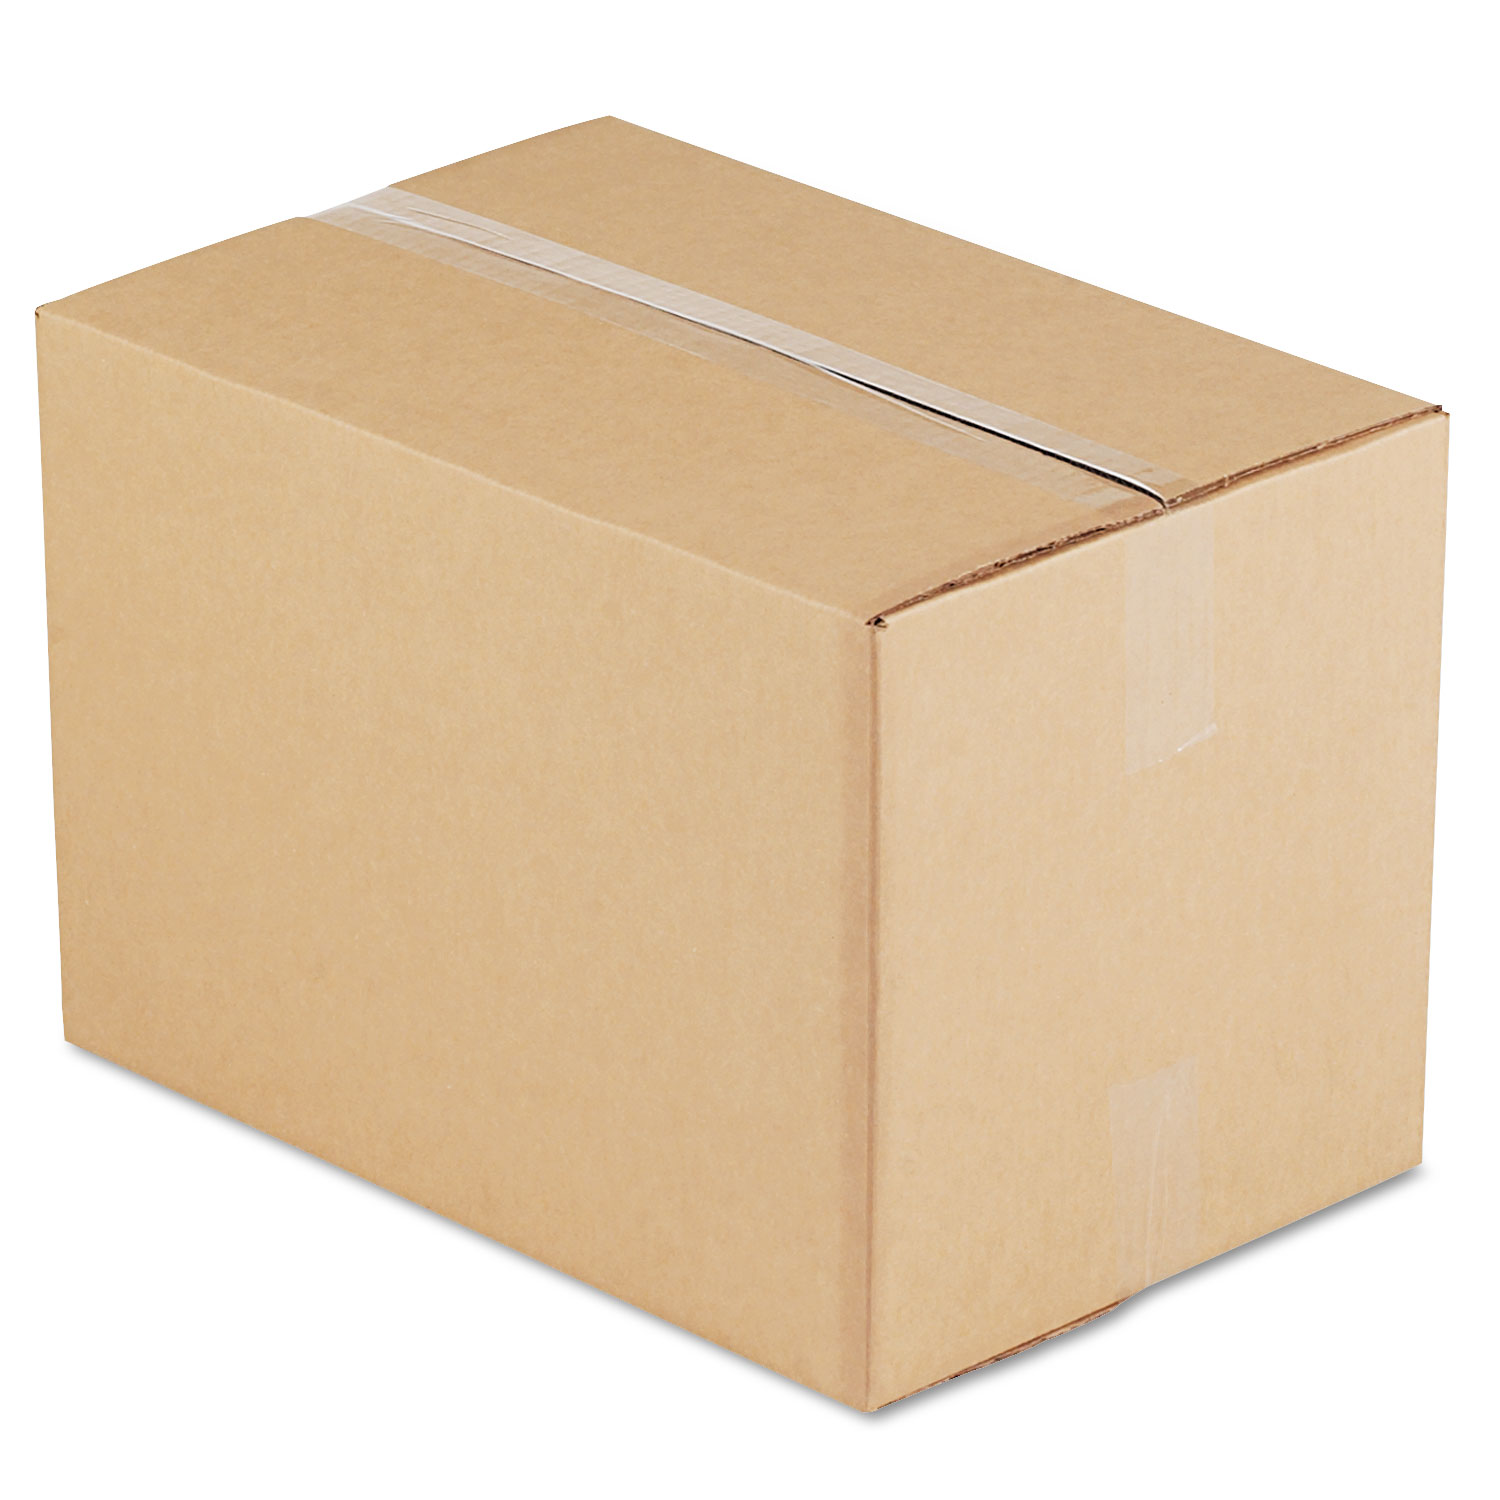 Fixed-Depth Shipping Boxes, Regular Slotted Container (RSC), 18